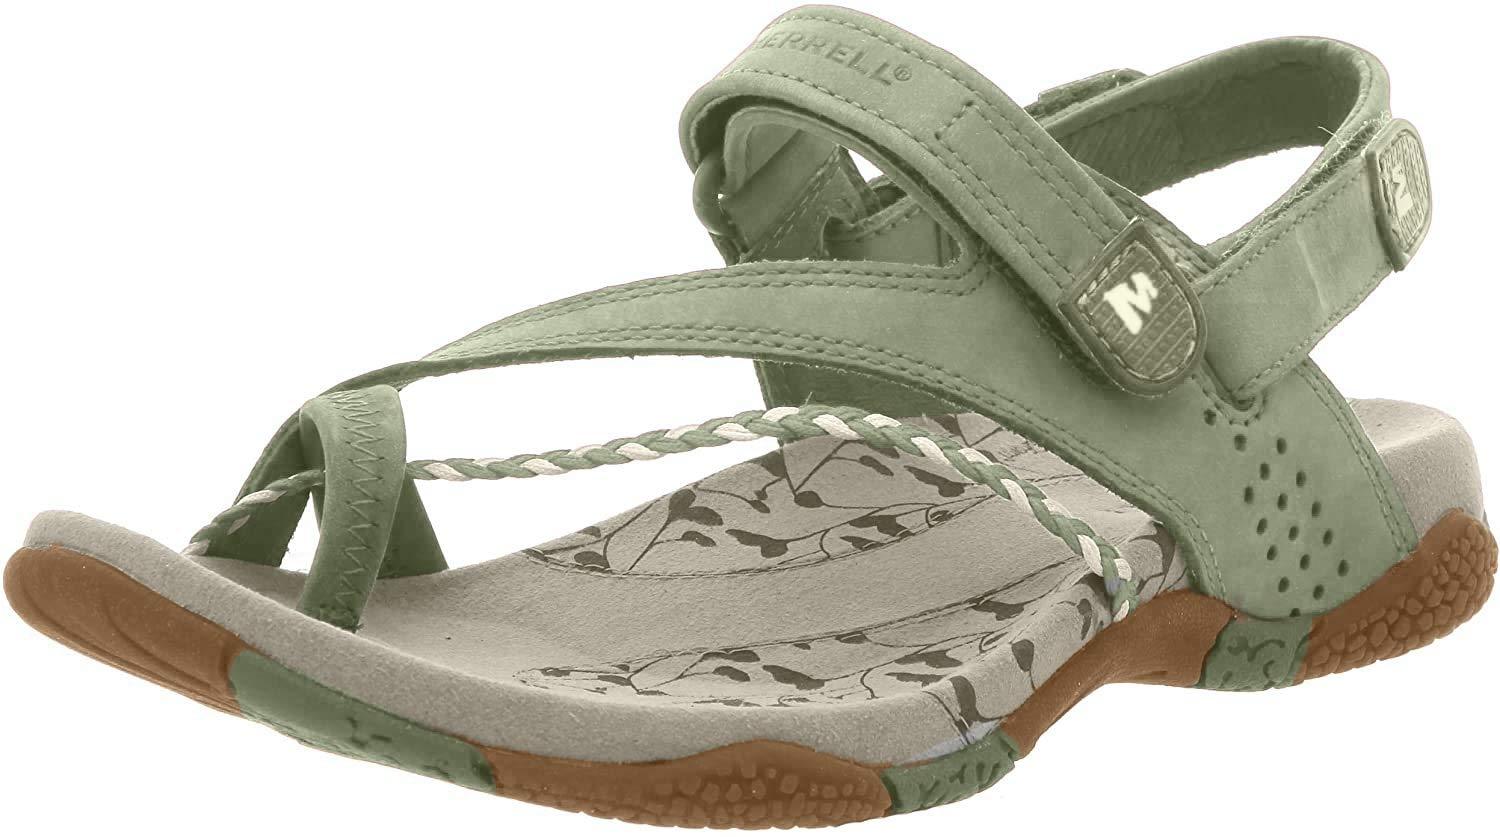 Merrell Siena Seagrass Flat Women Sandals | Outdoor Walking Summer Shoes  For Ladies | Premium Leather And Q-form Sole | Size Uk 4 - Lyst